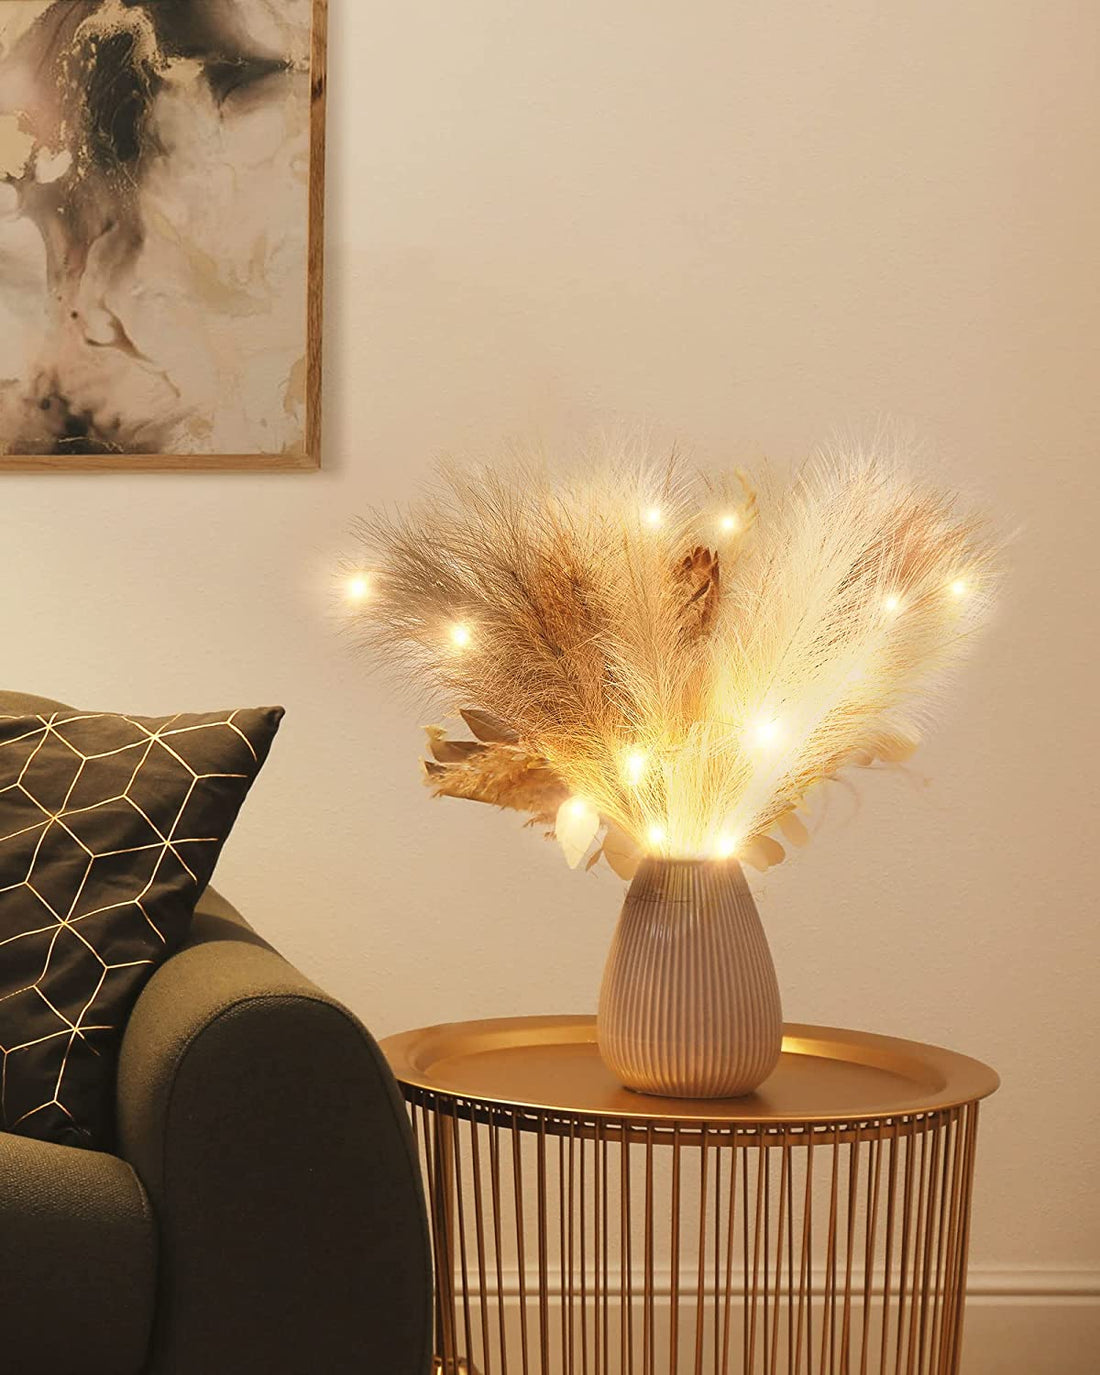 How to Decorate with Pampas Grass?